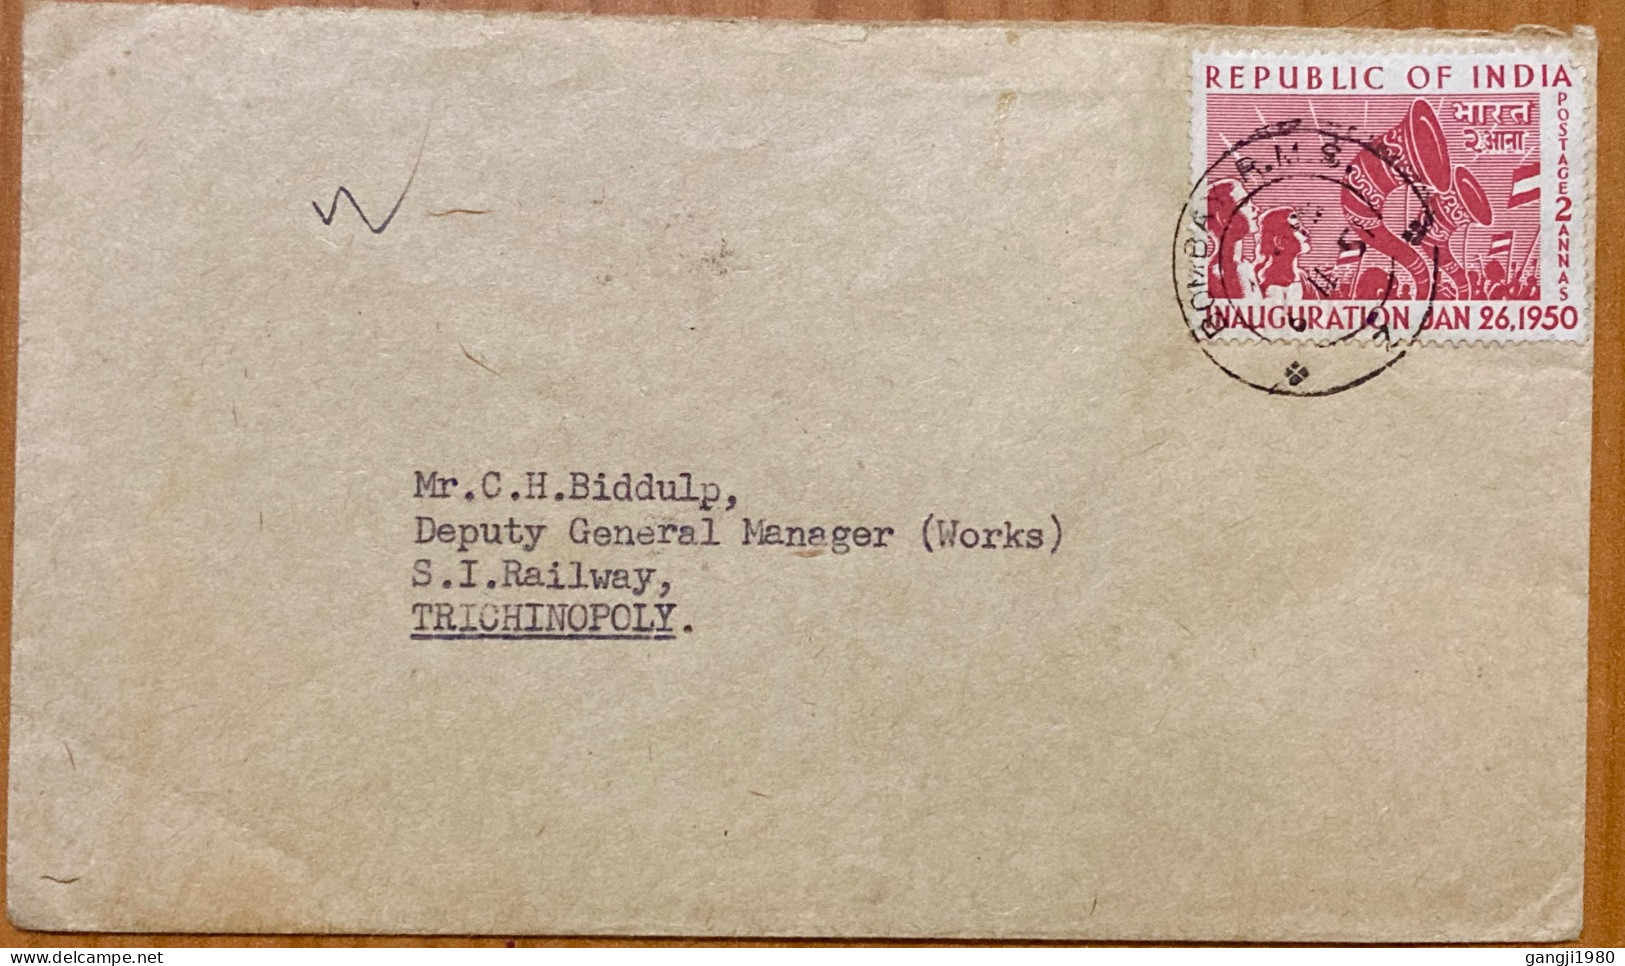 INDIA 1951, COVER USED, RARE PICTURE SLOGAN, CENSUS OF INDIA, REPUBLIC STAMP, TIRUCHIRAPALLY CITY CANCEL. - Lettres & Documents